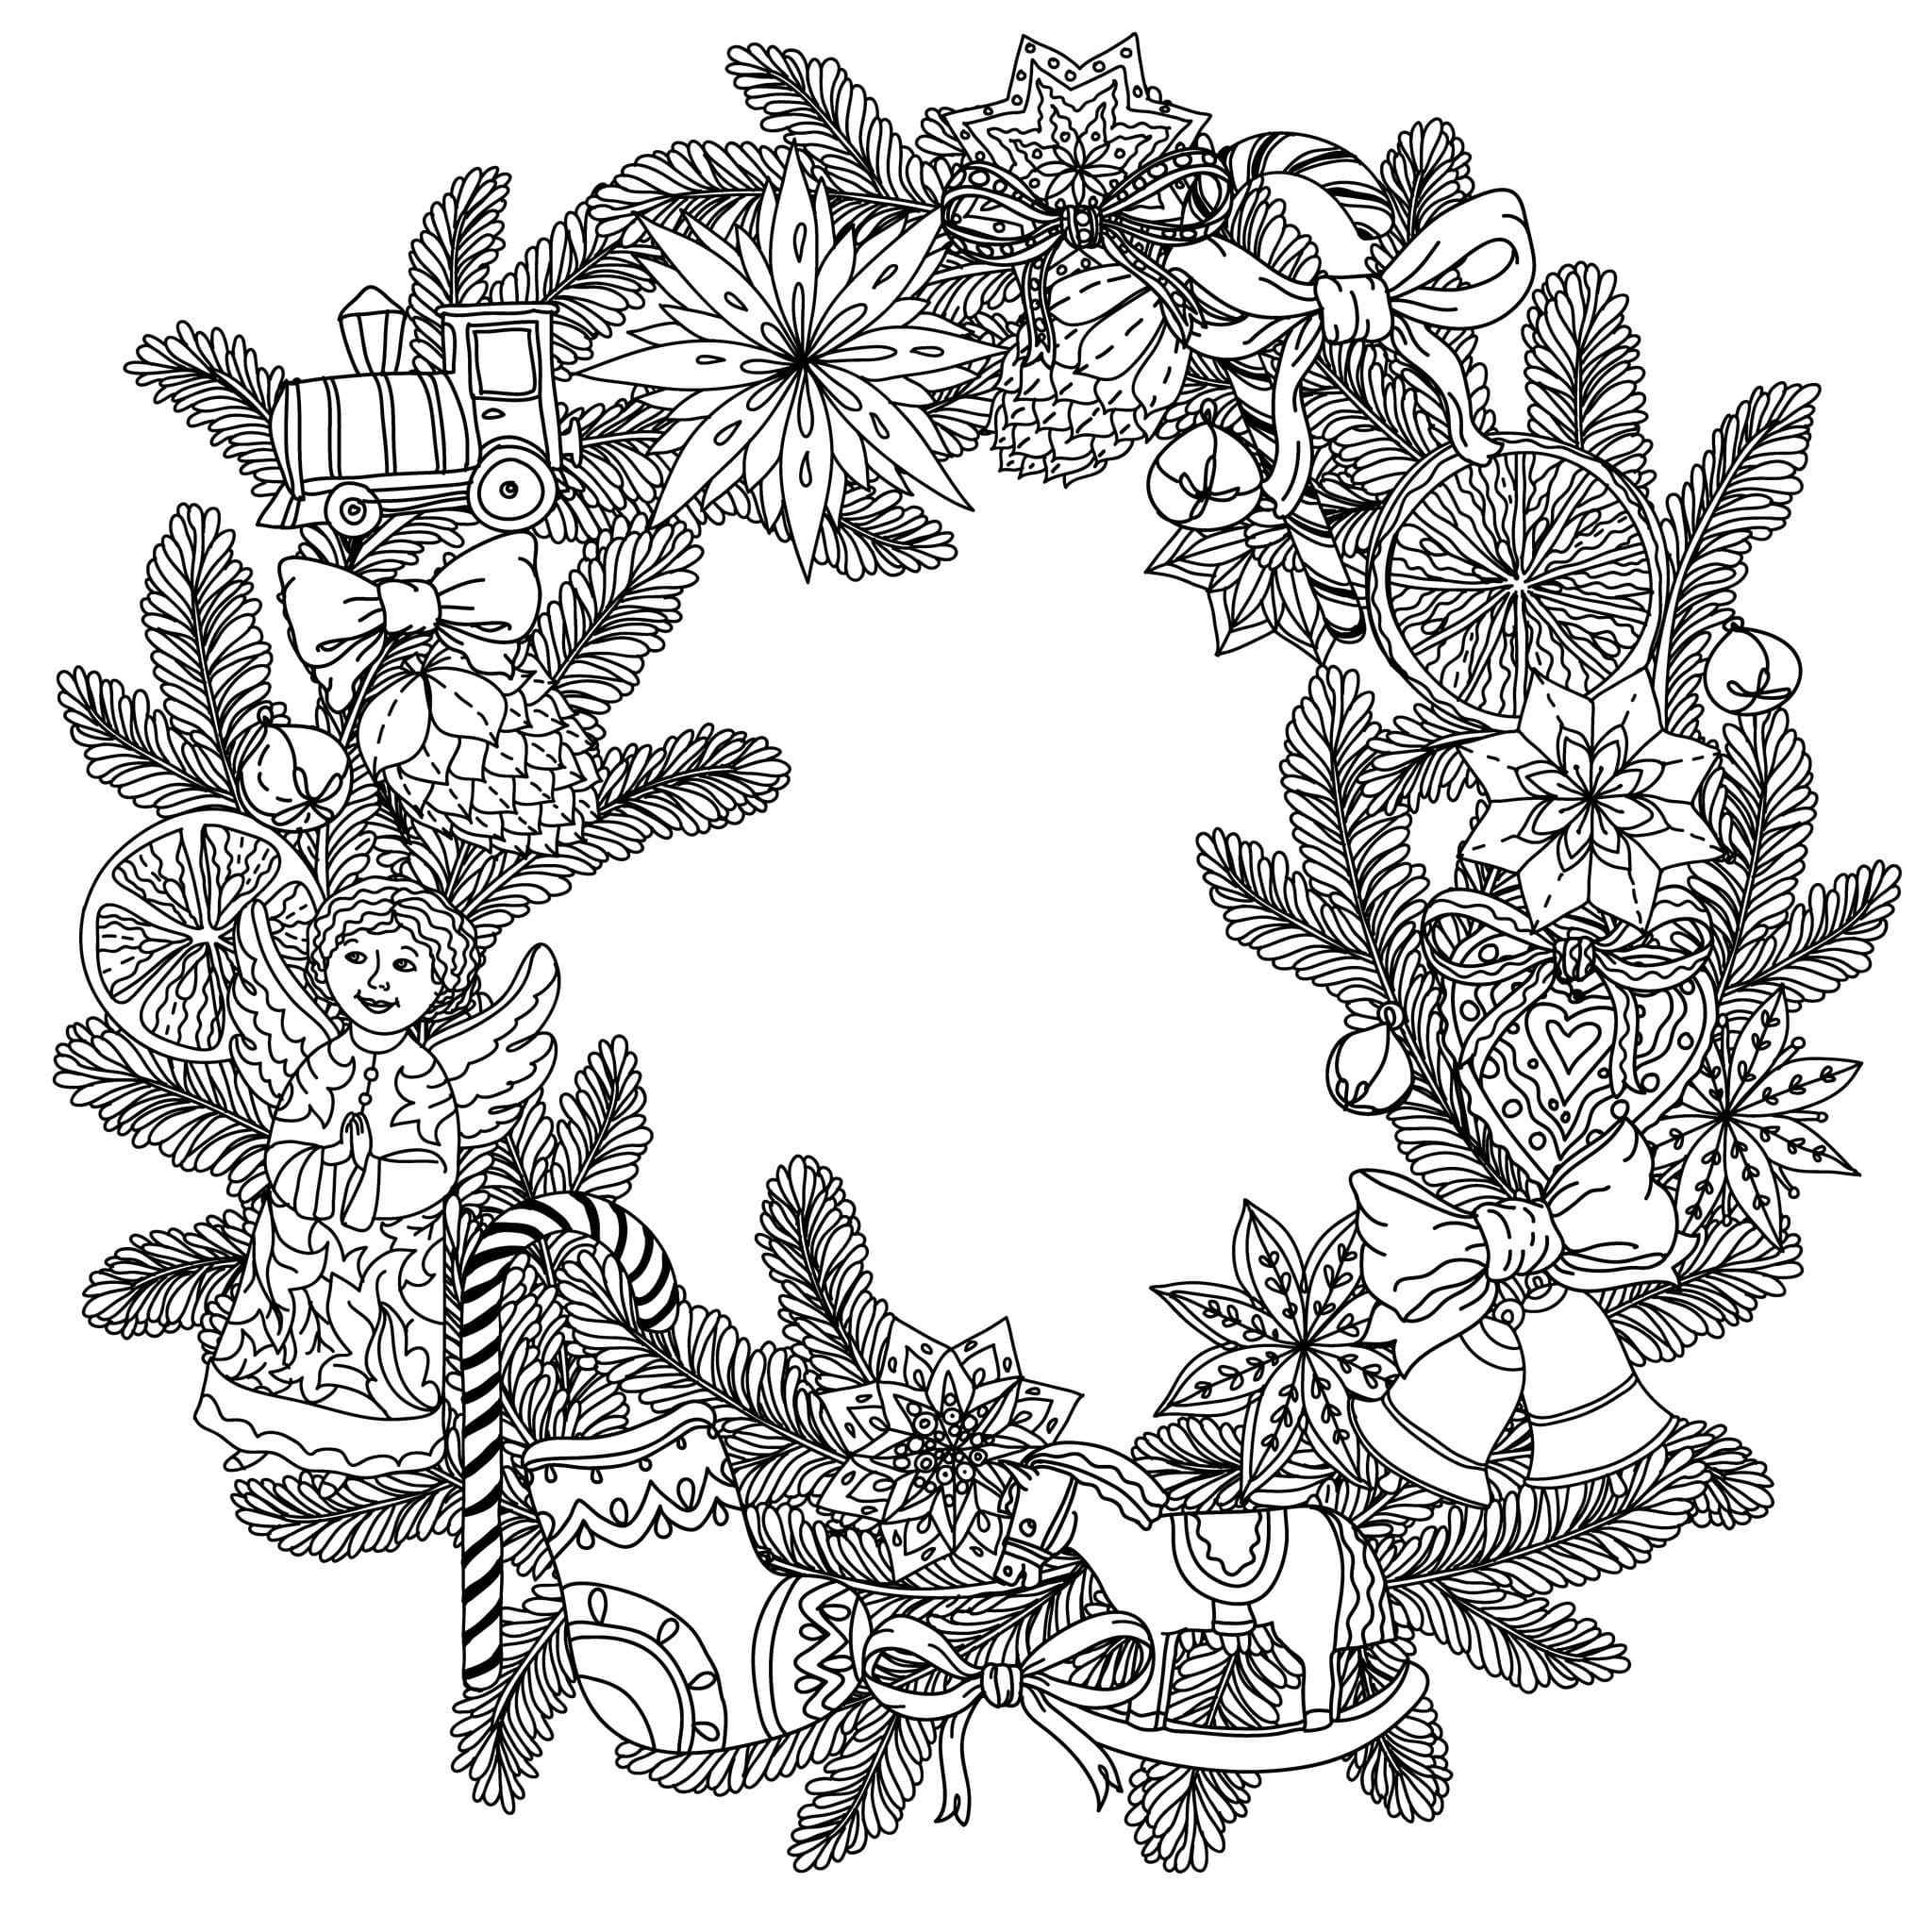 This Classic Christmas Wreath Coloring Page